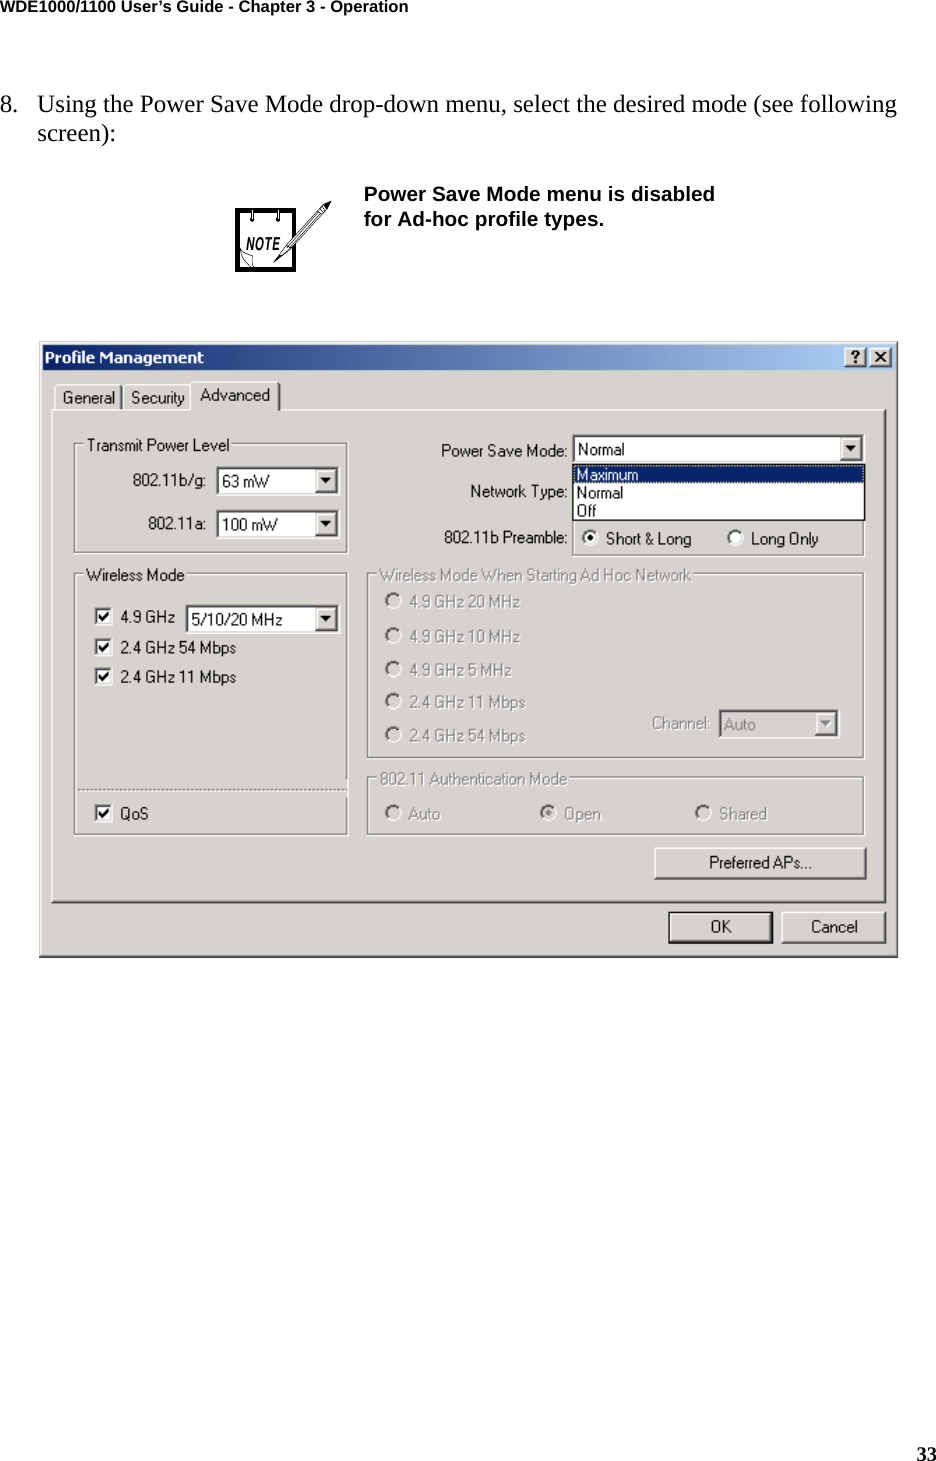 33WDE1000/1100 User’s Guide - Chapter 3 - Operation8. Using the Power Save Mode drop-down menu, select the desired mode (see following screen):Power Save Mode menu is disabled for Ad-hoc profile types.NOTE